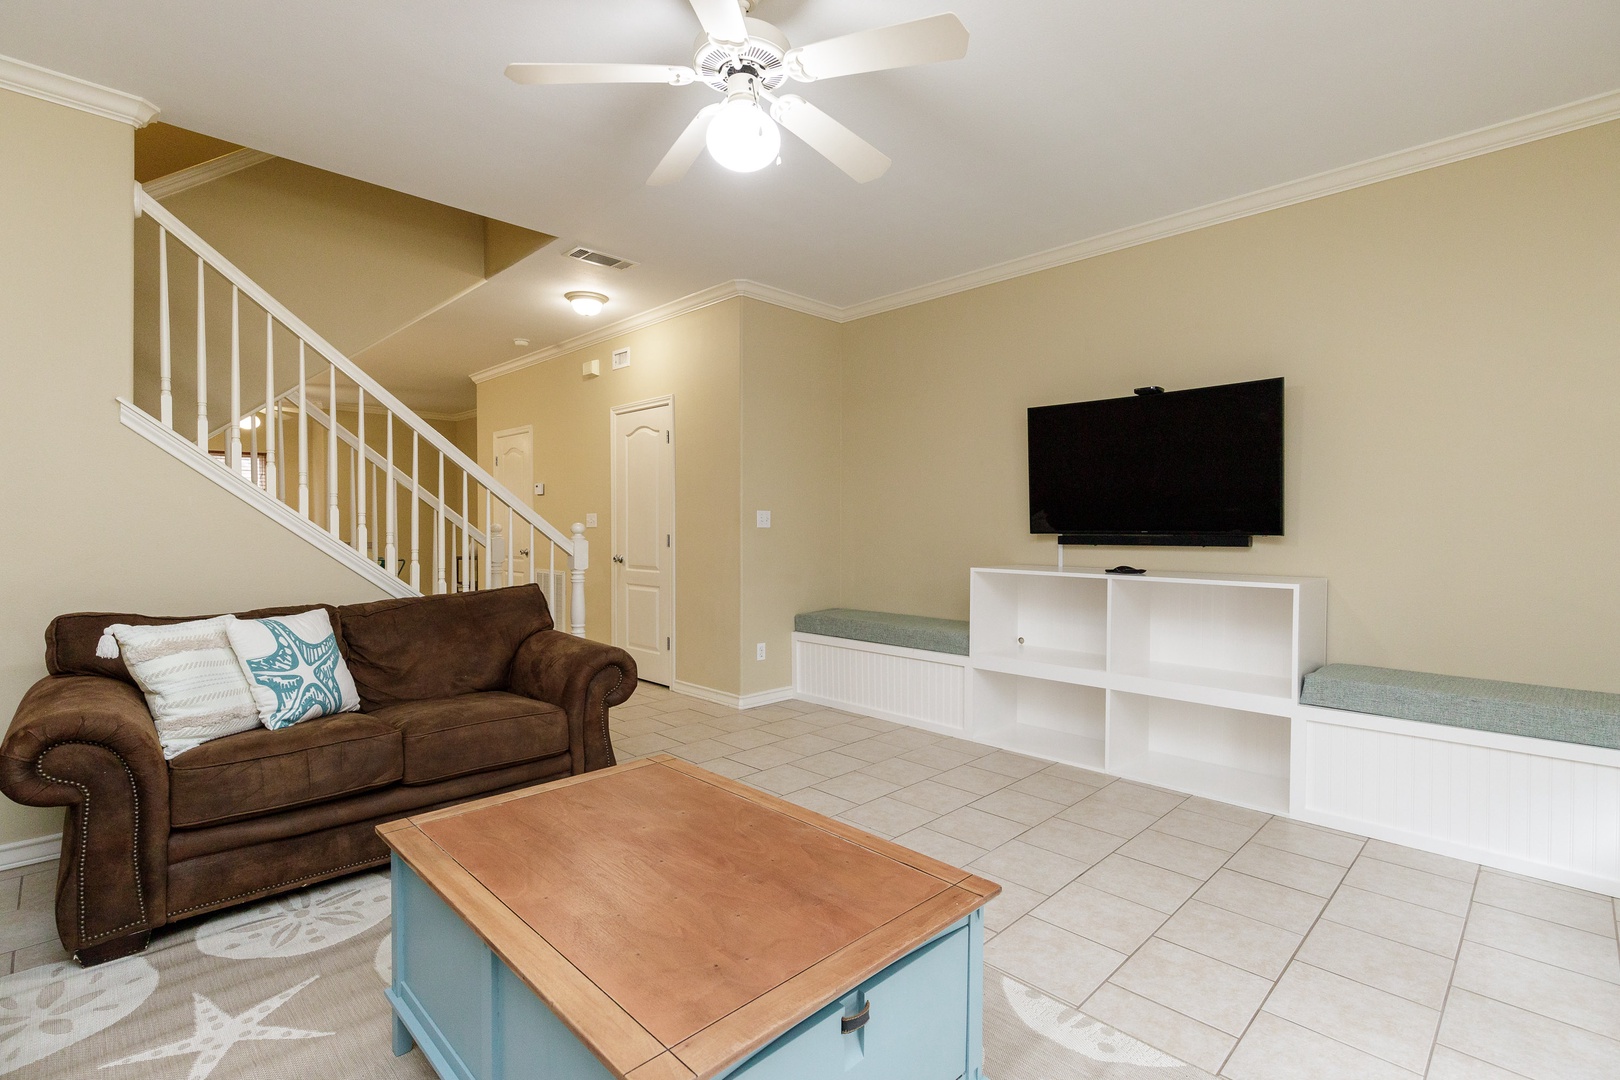 The 2nd-floor main living spaces offer ample room for the whole family